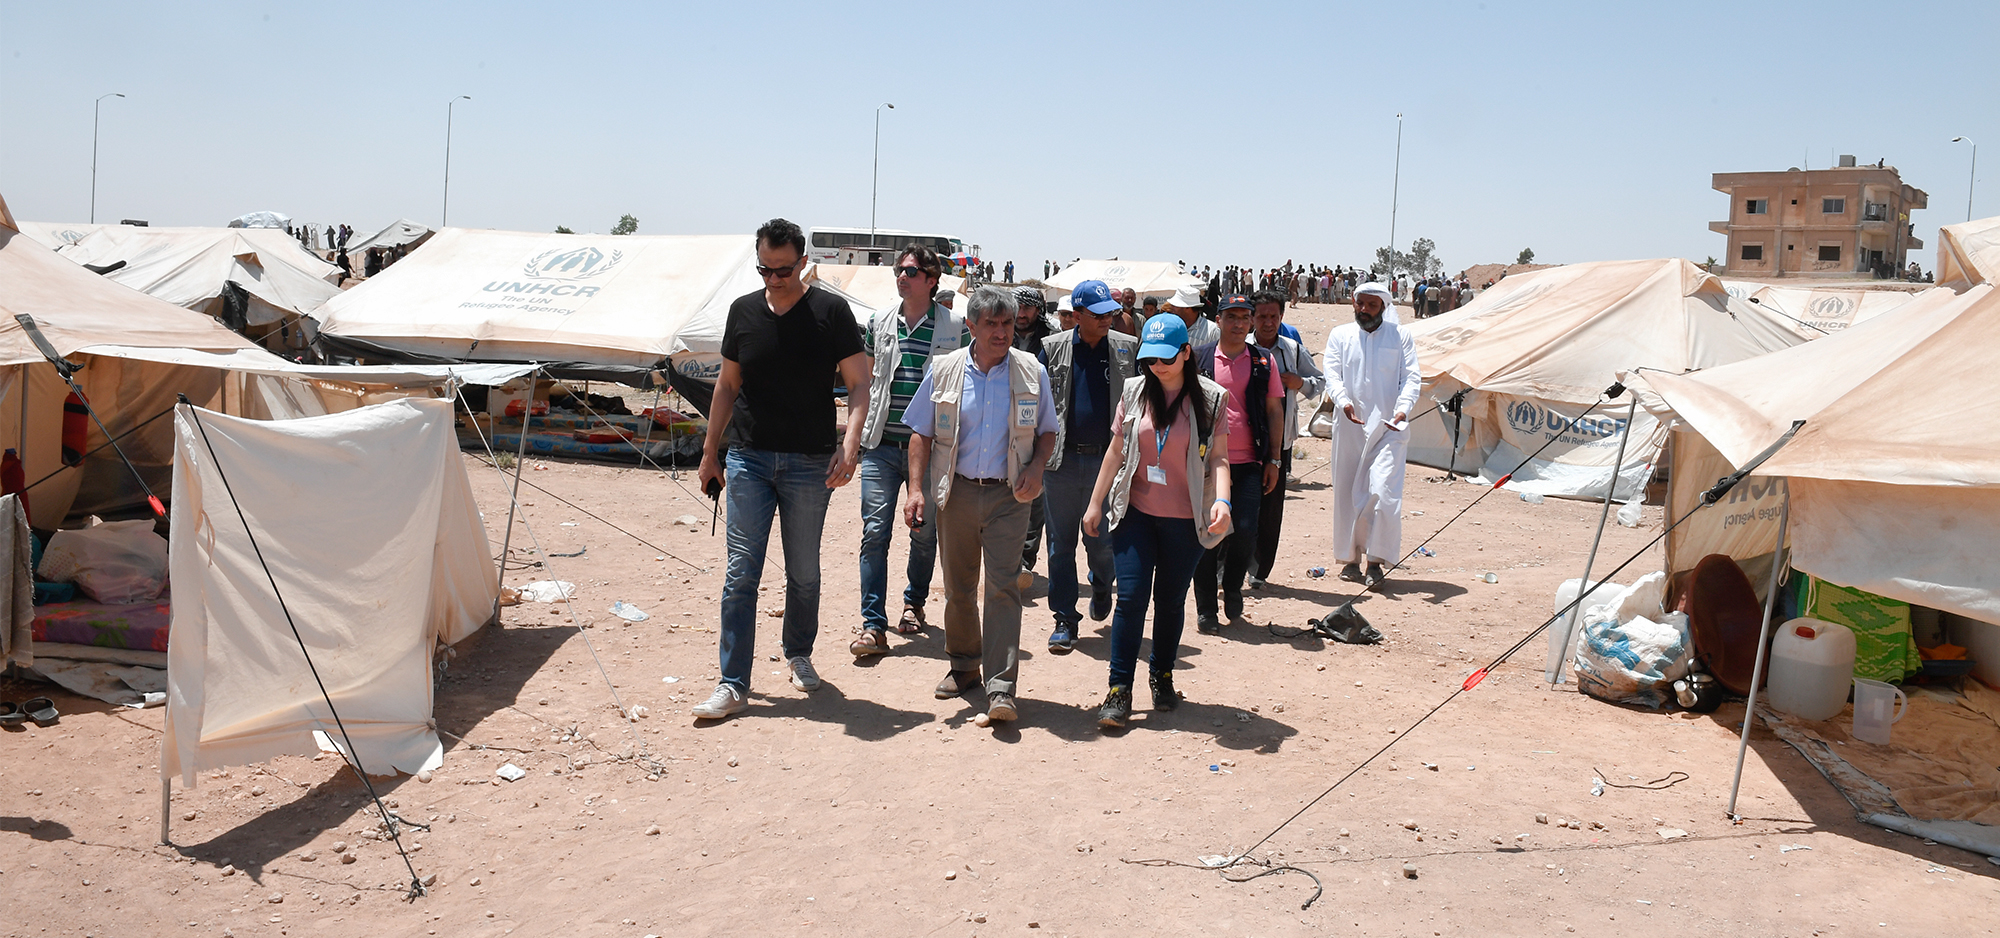 UNHCR exerting efforts to support displaced people living in camps northern Syria